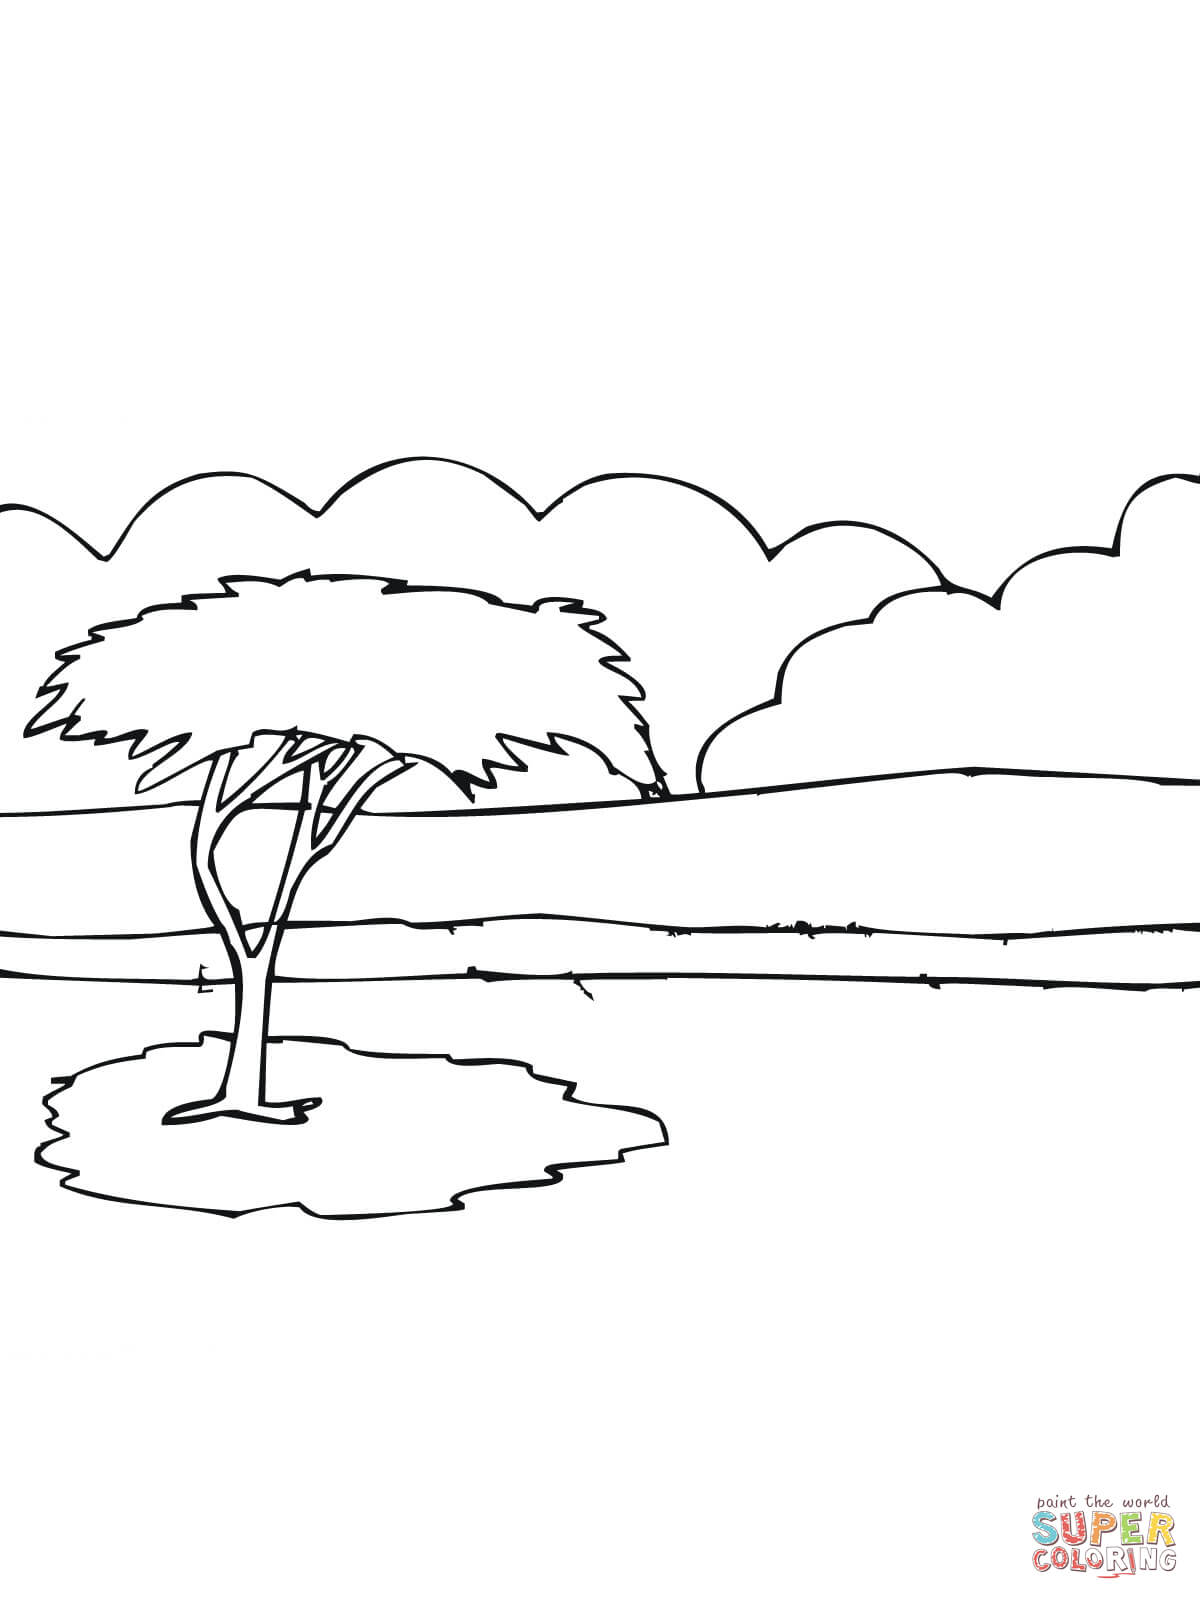 African Acacia Tree coloring page | Free Printable Coloring Pages